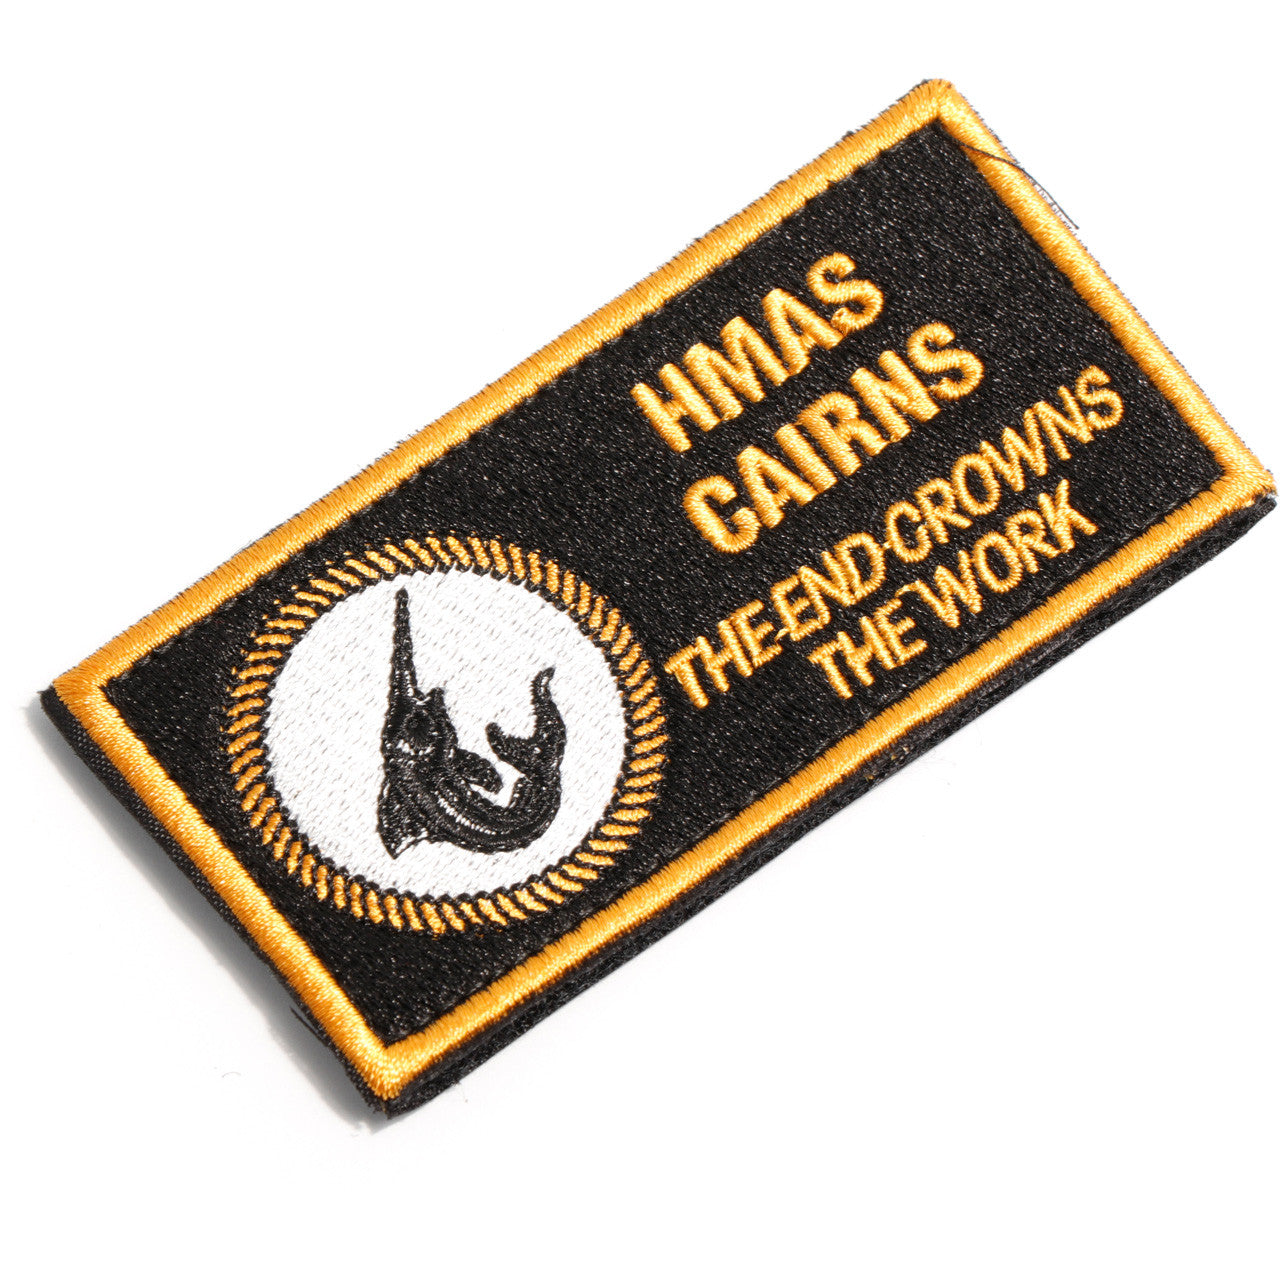 The HMAS Cairns DPNU Patch is a must-have for all military enthusiasts. This embroidered patch features the iconic HMAS Cairns logo in black and yellow, adding a touch of style to any outfit or accessory. With its convenient hook-and-loop backing, it can be easily attached to clothing, bags, or hats. Show your support for the HMAS Cairns with this high-quality patch. www.defenceqstore.com.au